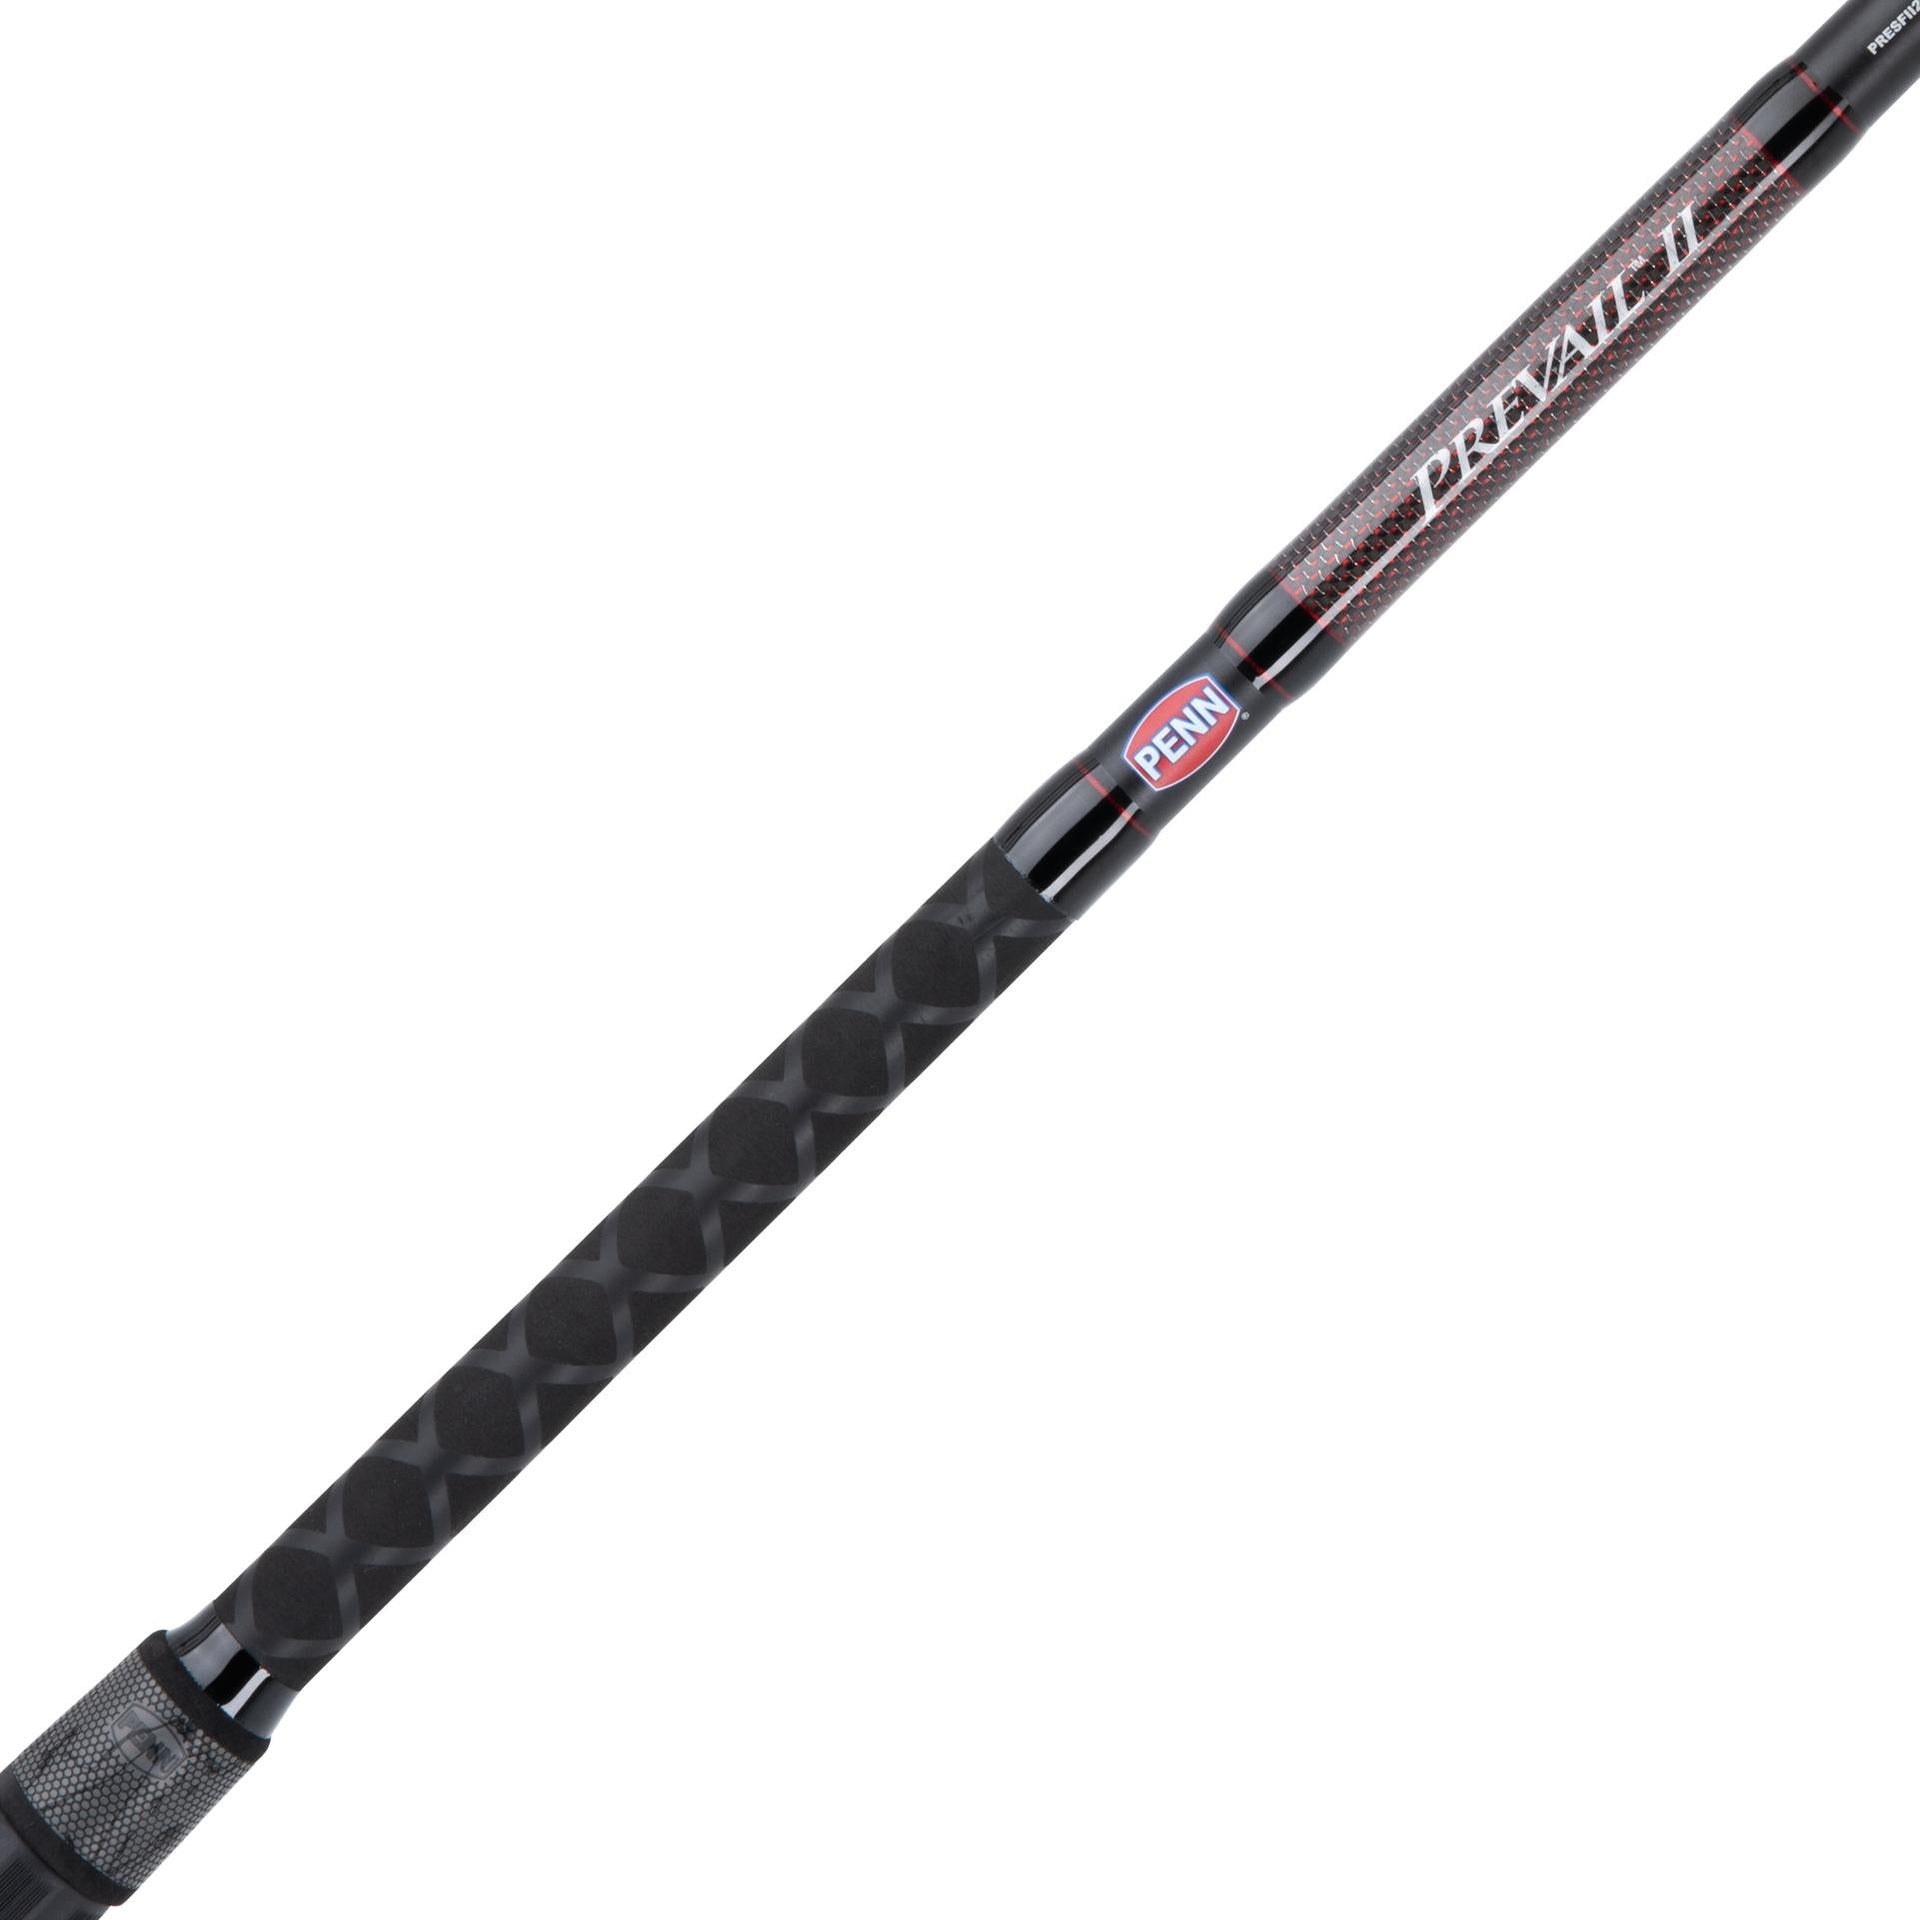 Prevail® II Conventional Surf Rod